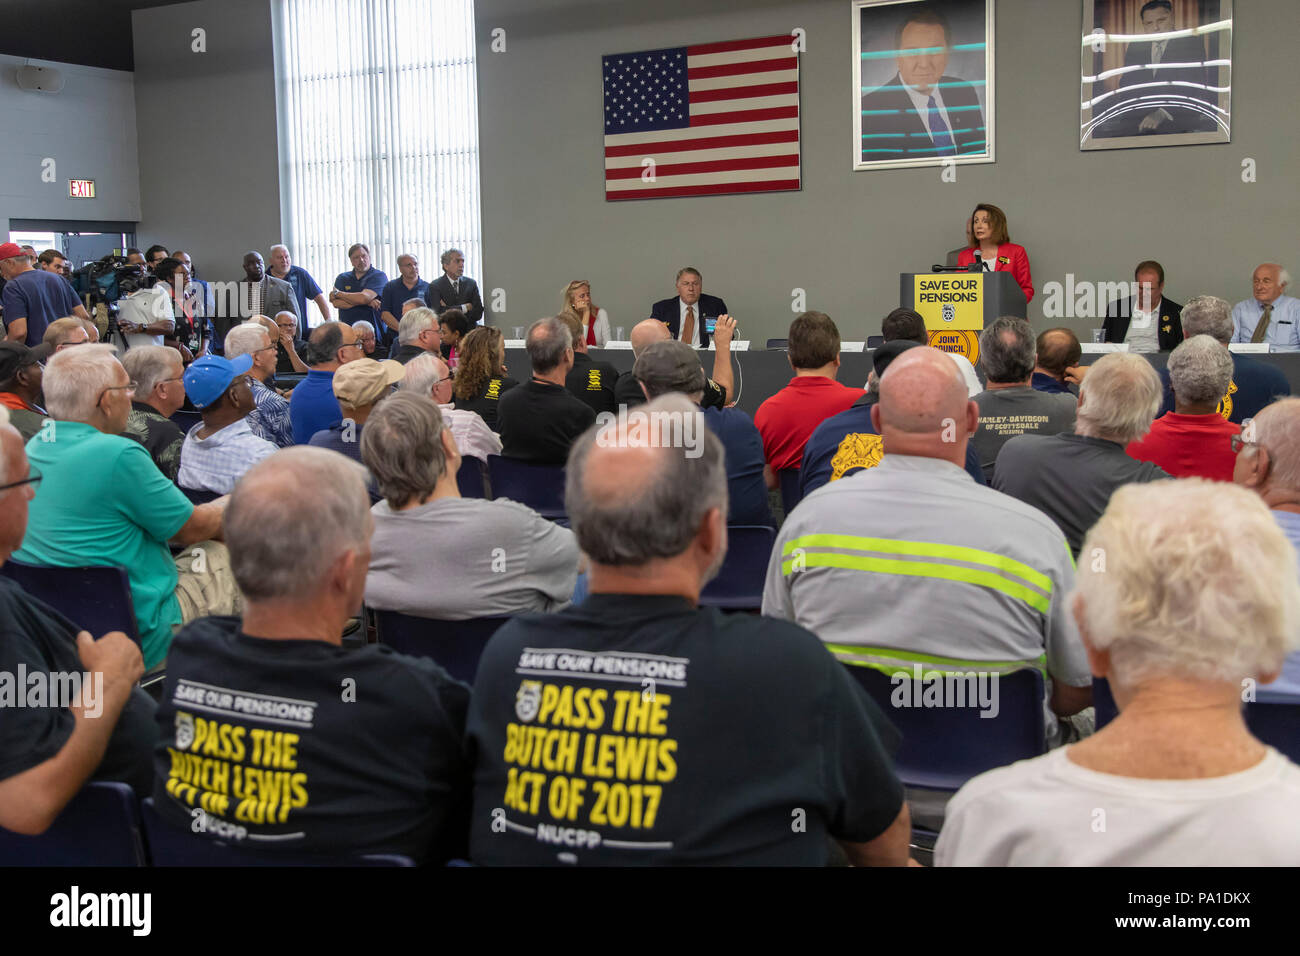 Detroit, Michigan USA - 20 July 2018 - House of Representatives Minority Leader Nancy Pelosi speaks as Teamsters and members of other unions rally to save their pensions. More than 300 multiemployer pension plans across the country are in financial difficulty. The unions want Congress to pass the Butch Lewis Act to protect pension benefits. Credit: Jim West/Alamy Live News Stock Photo